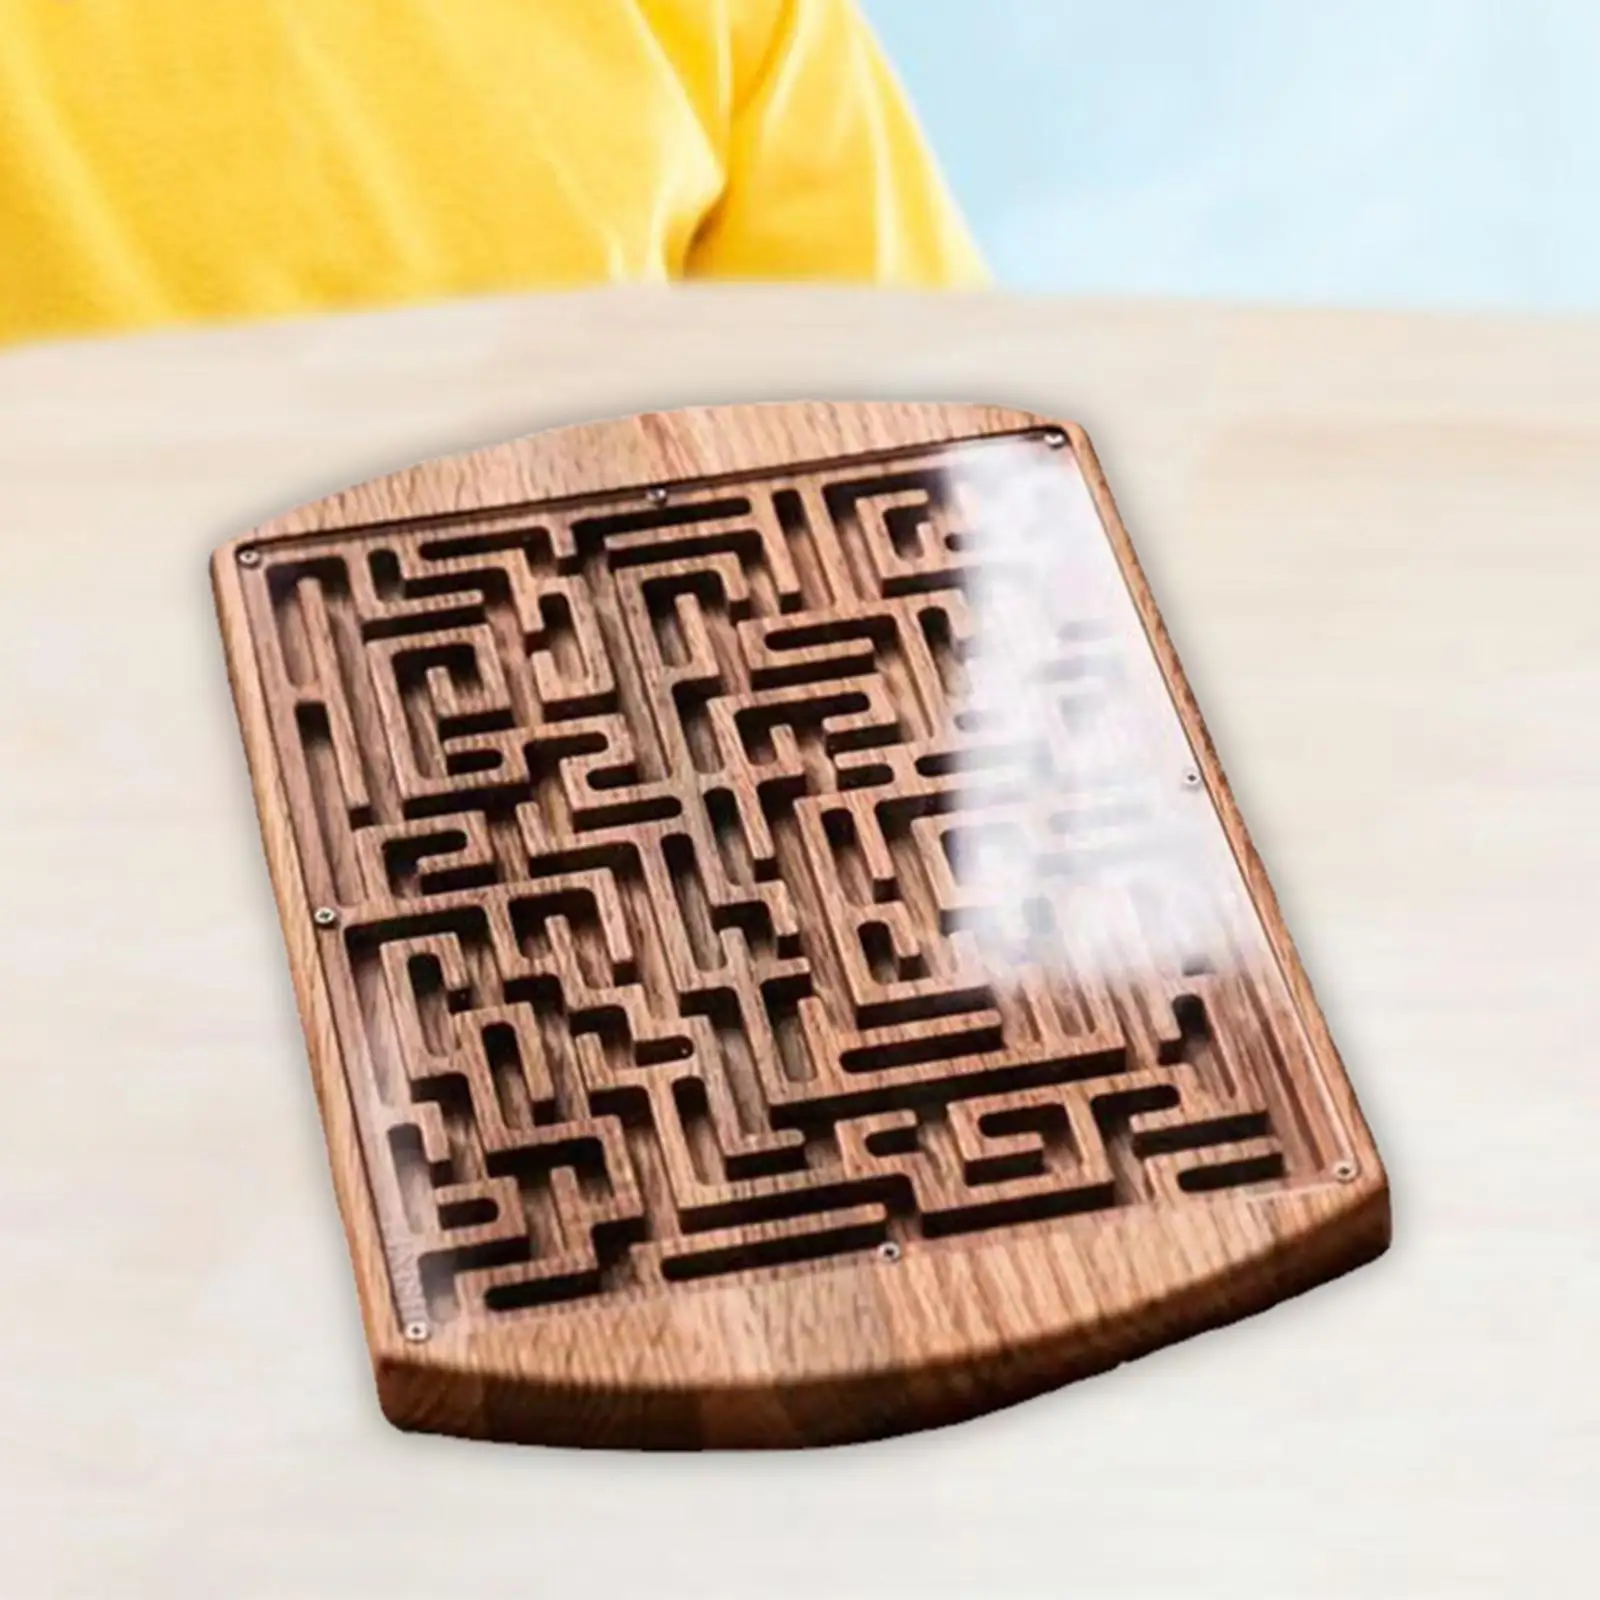 

Wooden Labyrinth Board Game,Maze Puzzle Game,Easy to Learn and Play,Labyrinth Game for Education and Fun,Kids, Teens